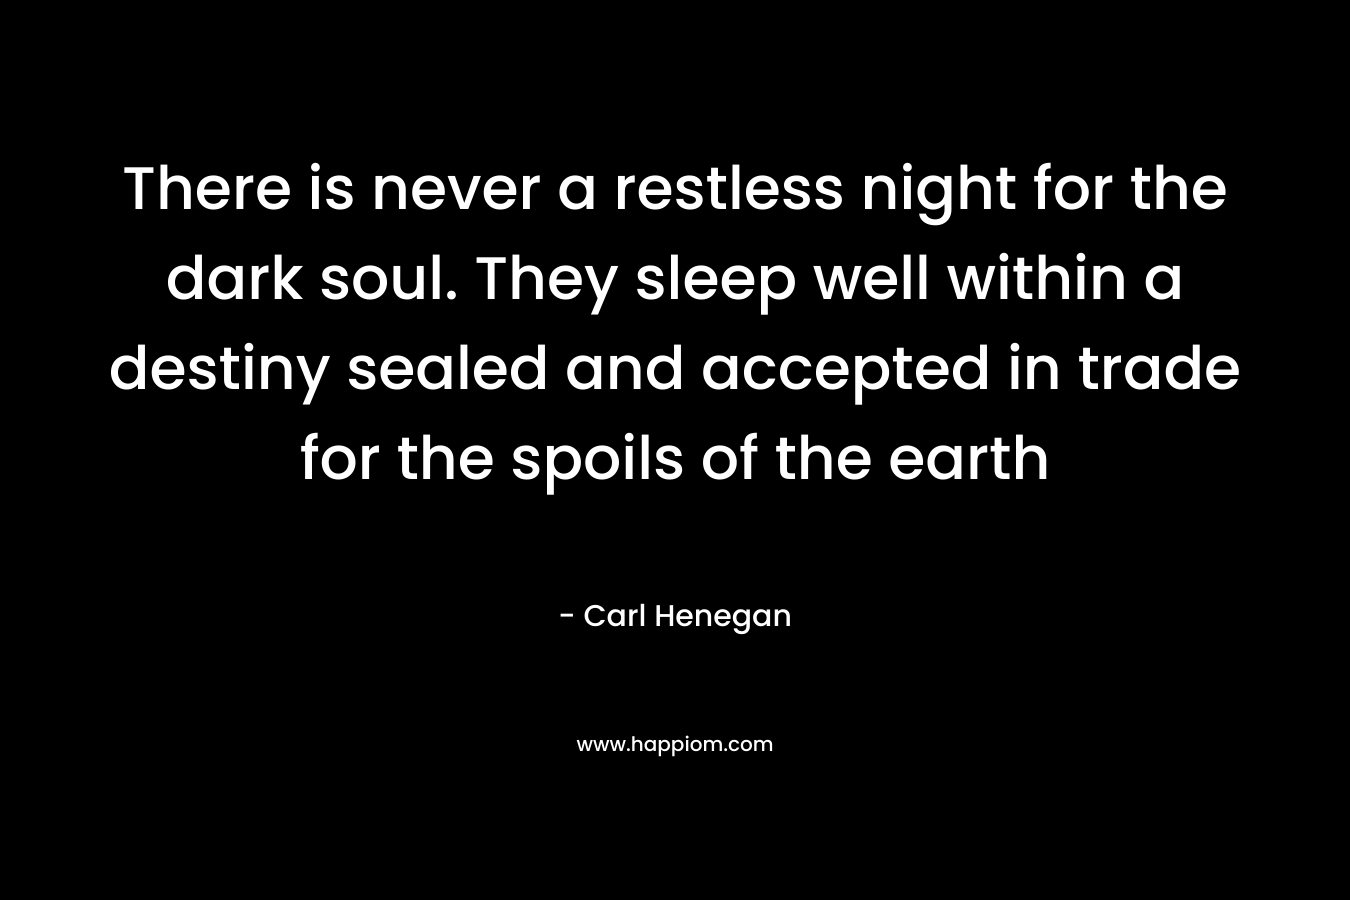 There is never a restless night for the dark soul. They sleep well within a destiny sealed and accepted in trade for the spoils of the earth